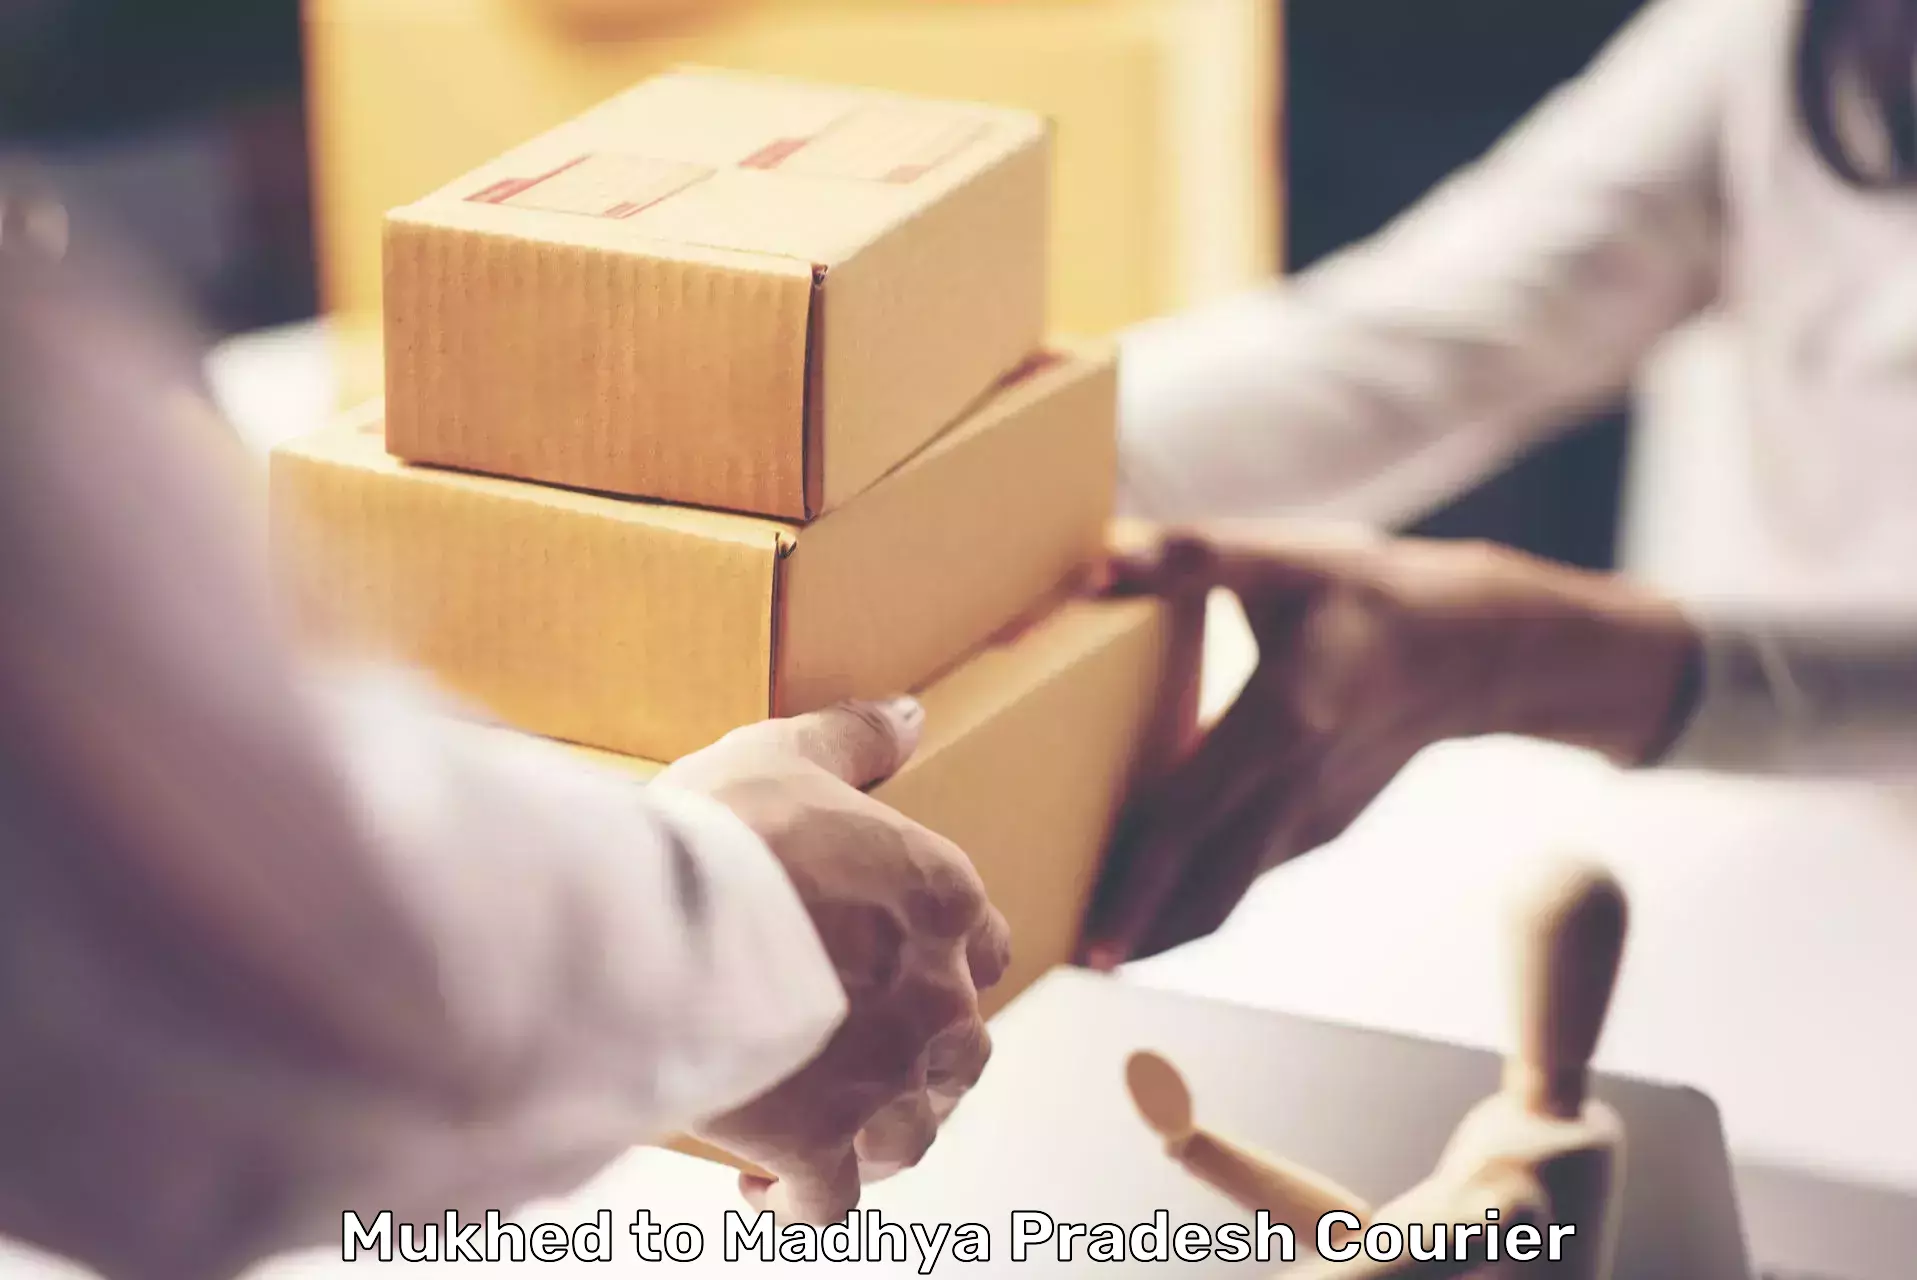 Business delivery service Mukhed to Indore